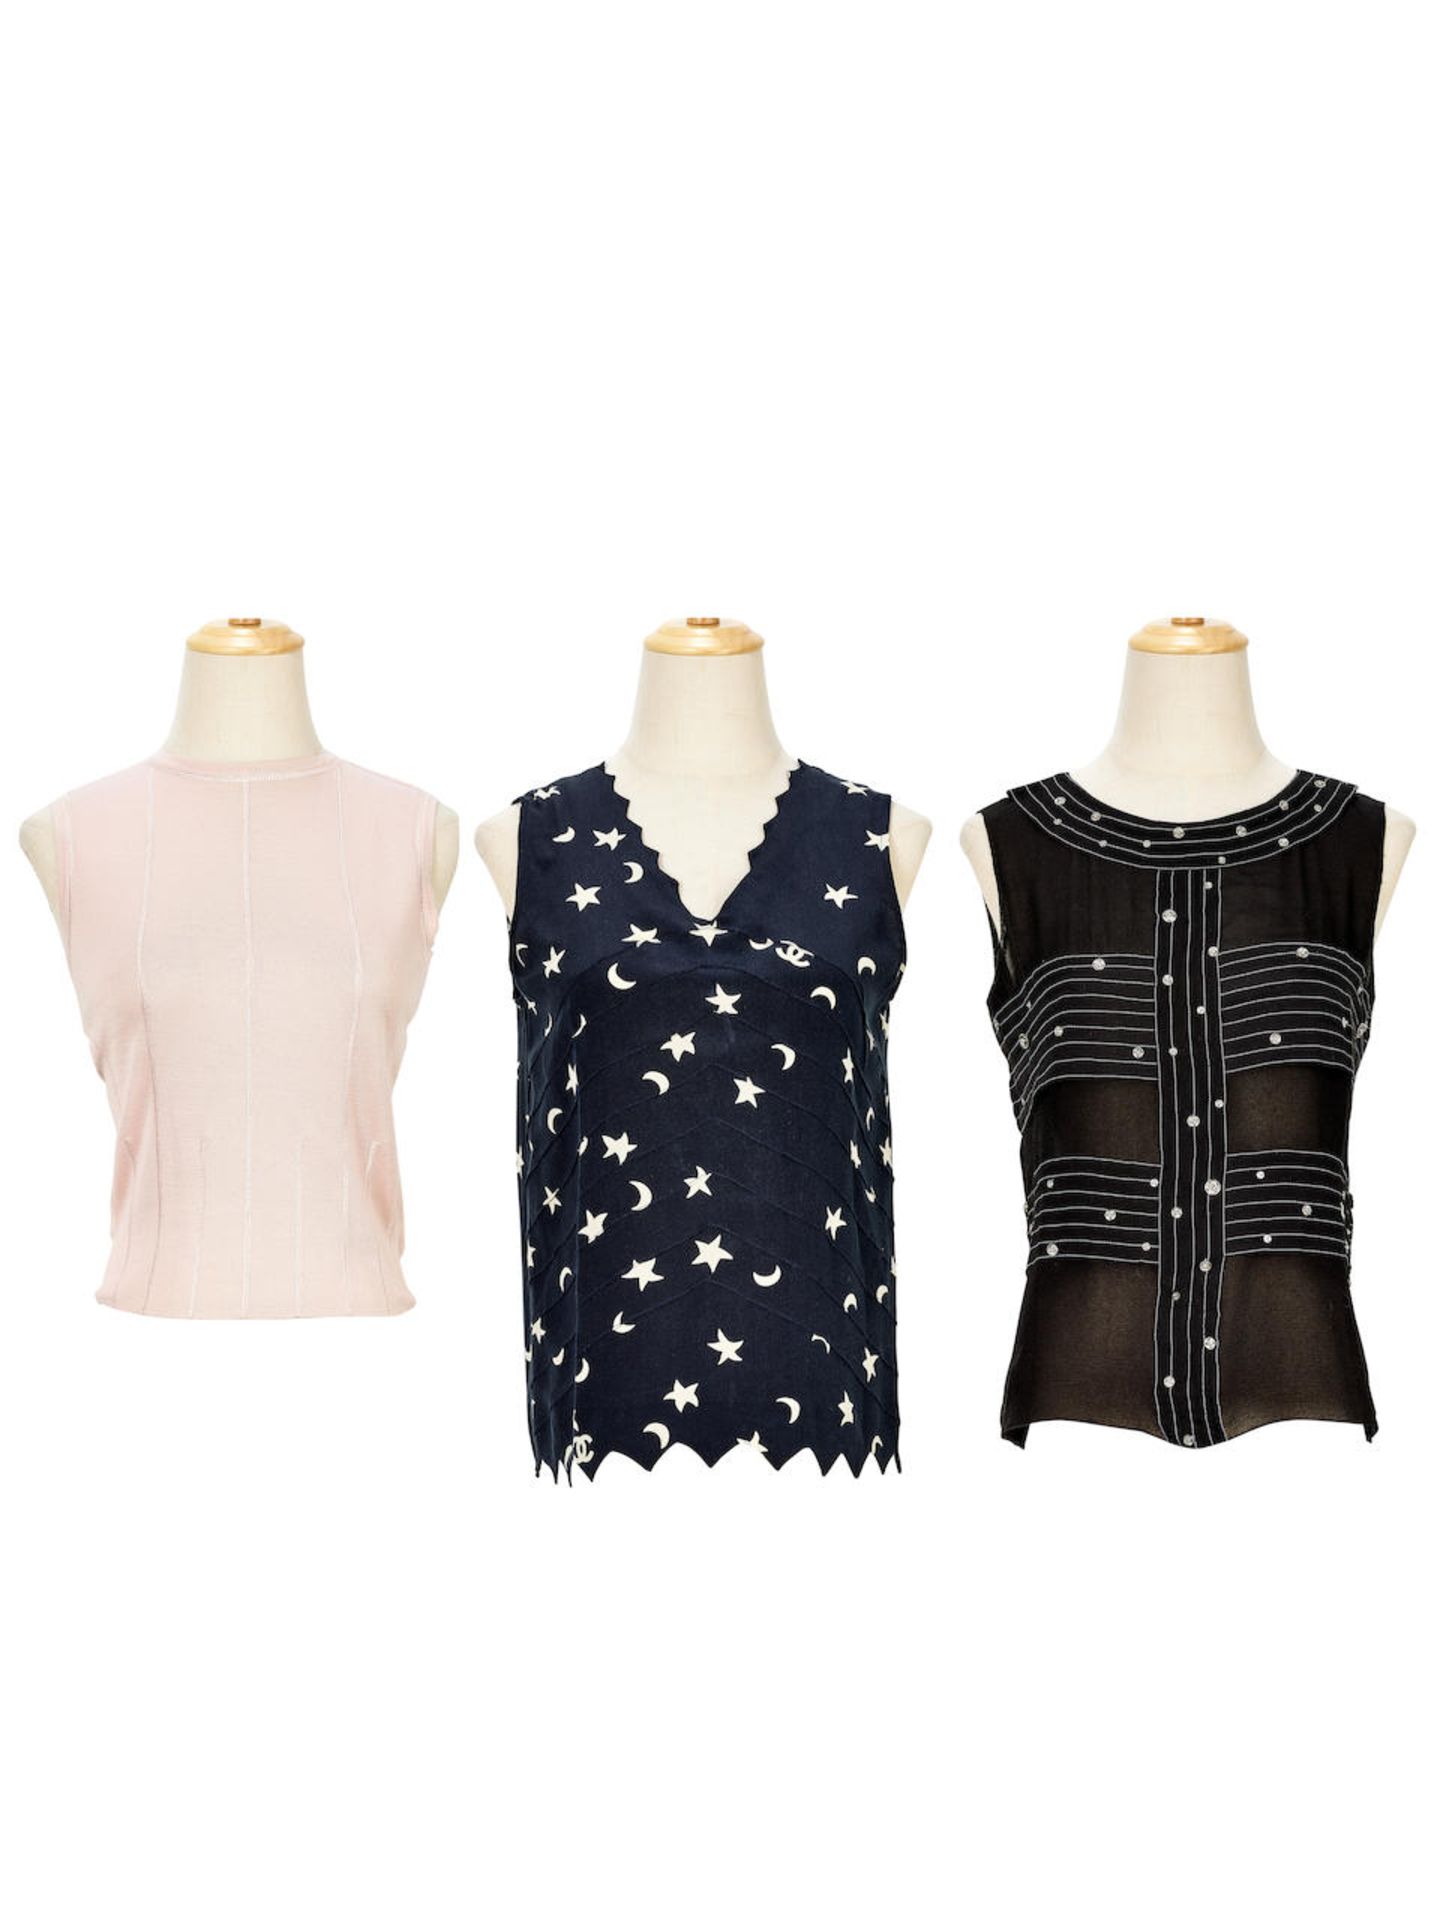 [NO RESERVE] CHANEL: A SET OF 3 LIGHT PINK CASHMERE SILK BACK ZIPPED TOP: BLUE STAR AND MOON CC ...